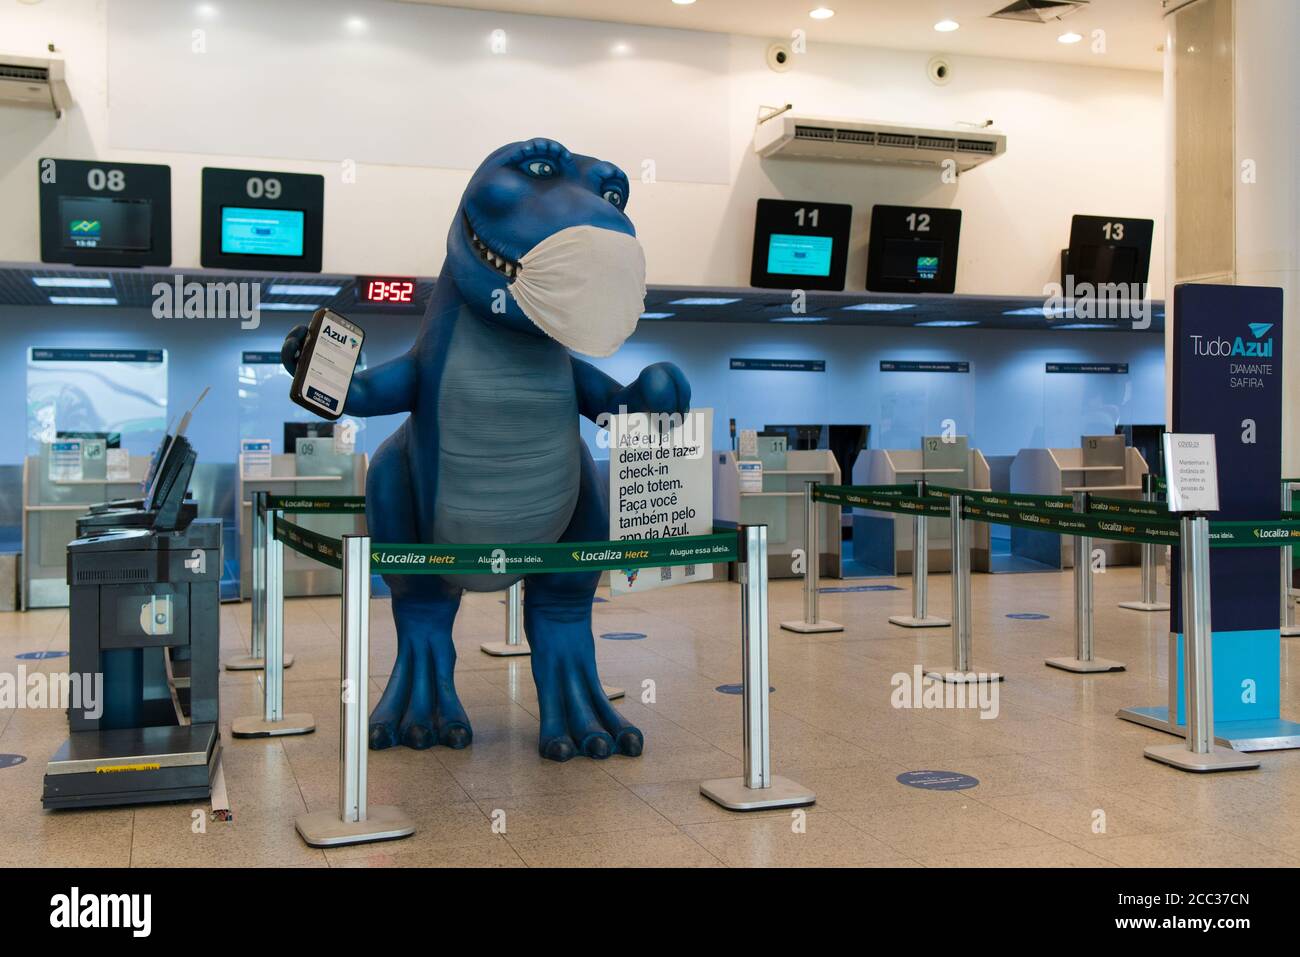 Rio de Janeiro, Brazil - July 16, 2020: Blue dinosaur with protective face mask at the check in counter in Santos Dumont airport. Stock Photo